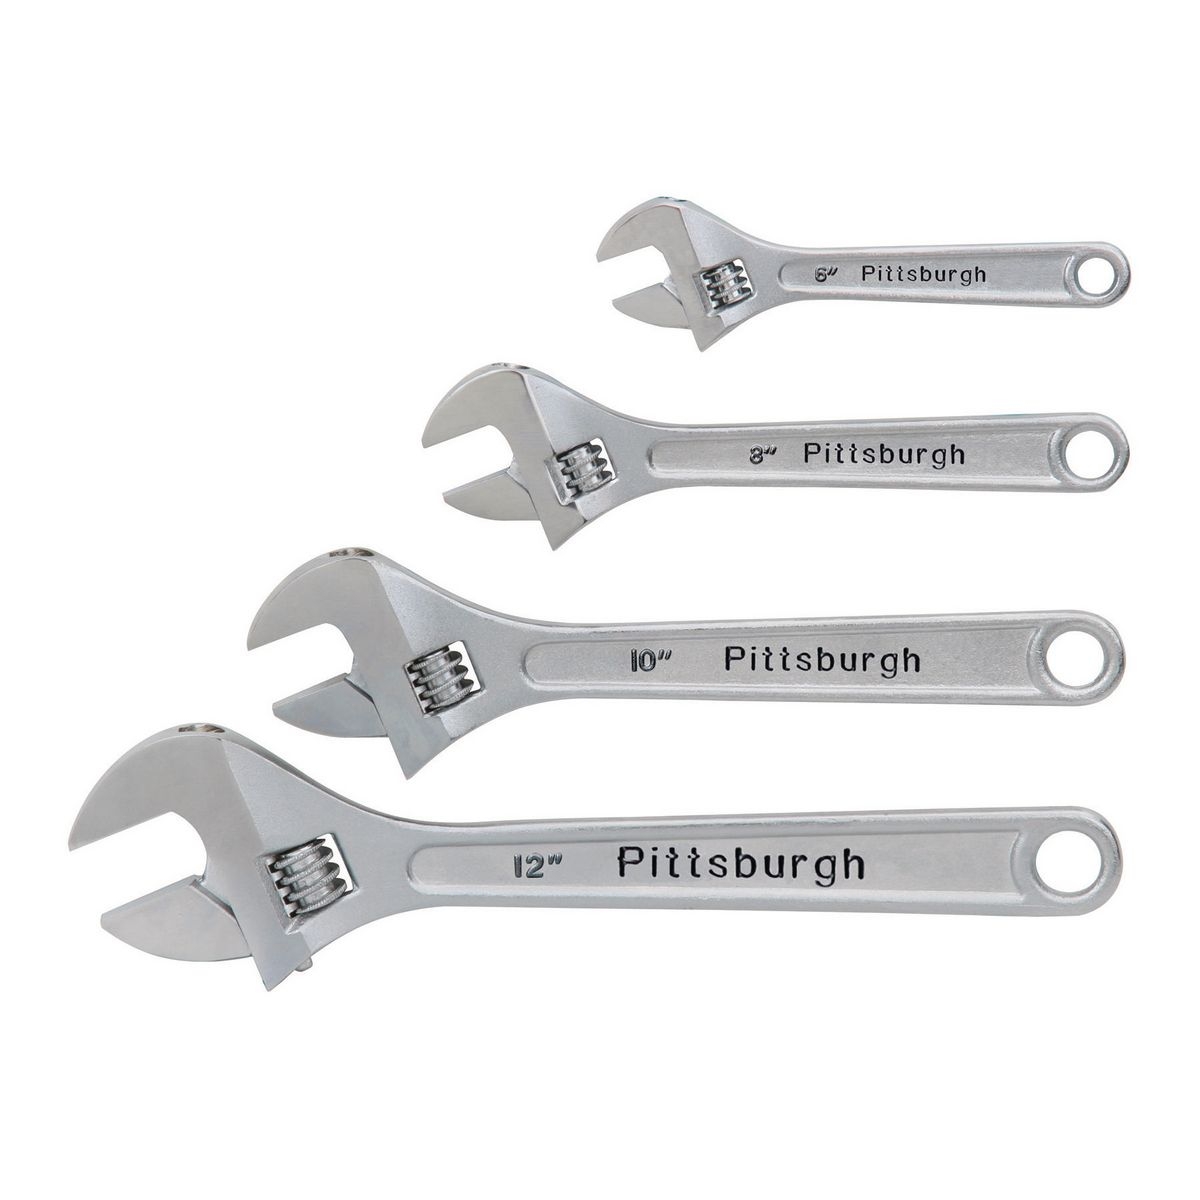 PITTSBURGH 4 Pc Adjustable Wrench Set - Item 00903 / 60690 / 63715 / 69427